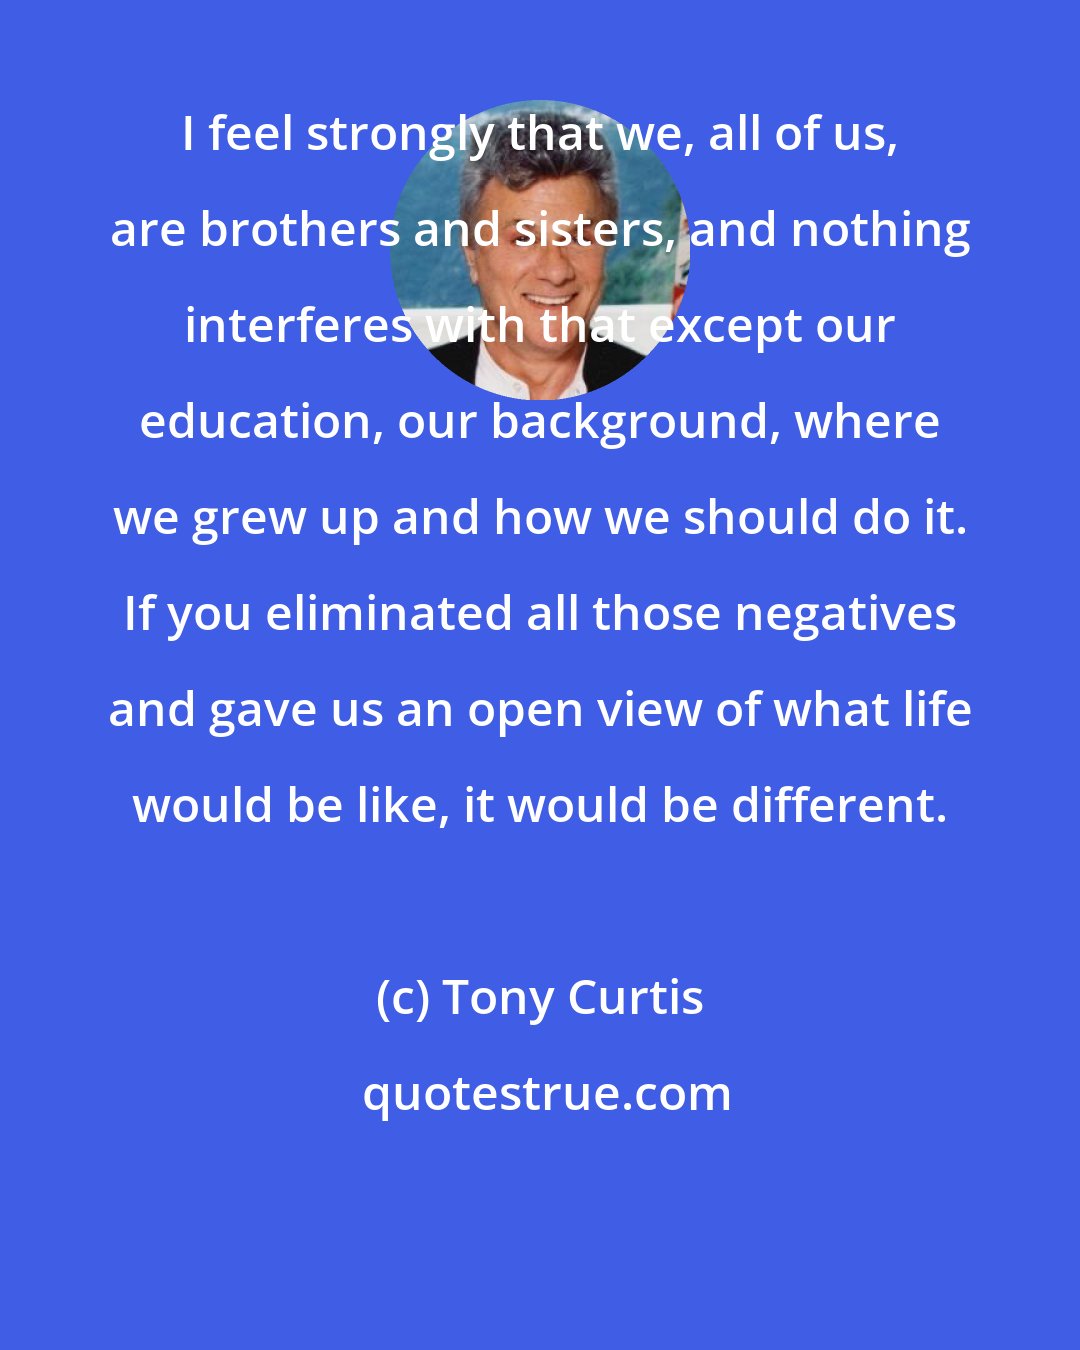 Tony Curtis: I feel strongly that we, all of us, are brothers and sisters, and nothing interferes with that except our education, our background, where we grew up and how we should do it. If you eliminated all those negatives and gave us an open view of what life would be like, it would be different.